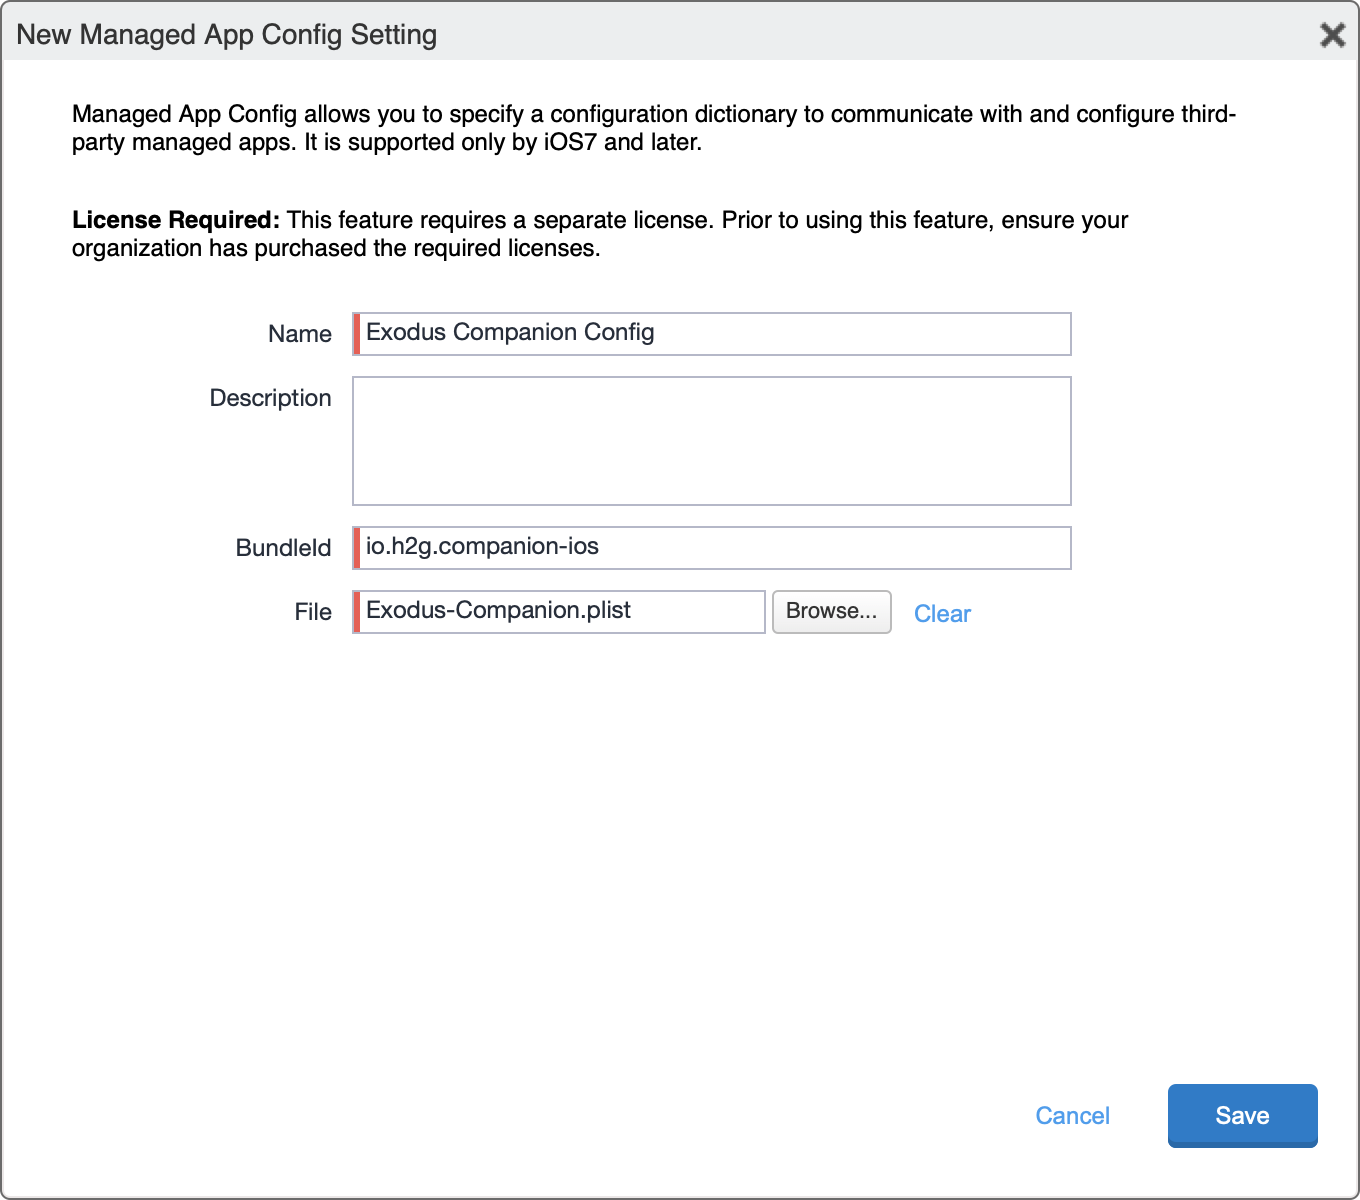 Configuring the Managed App Config